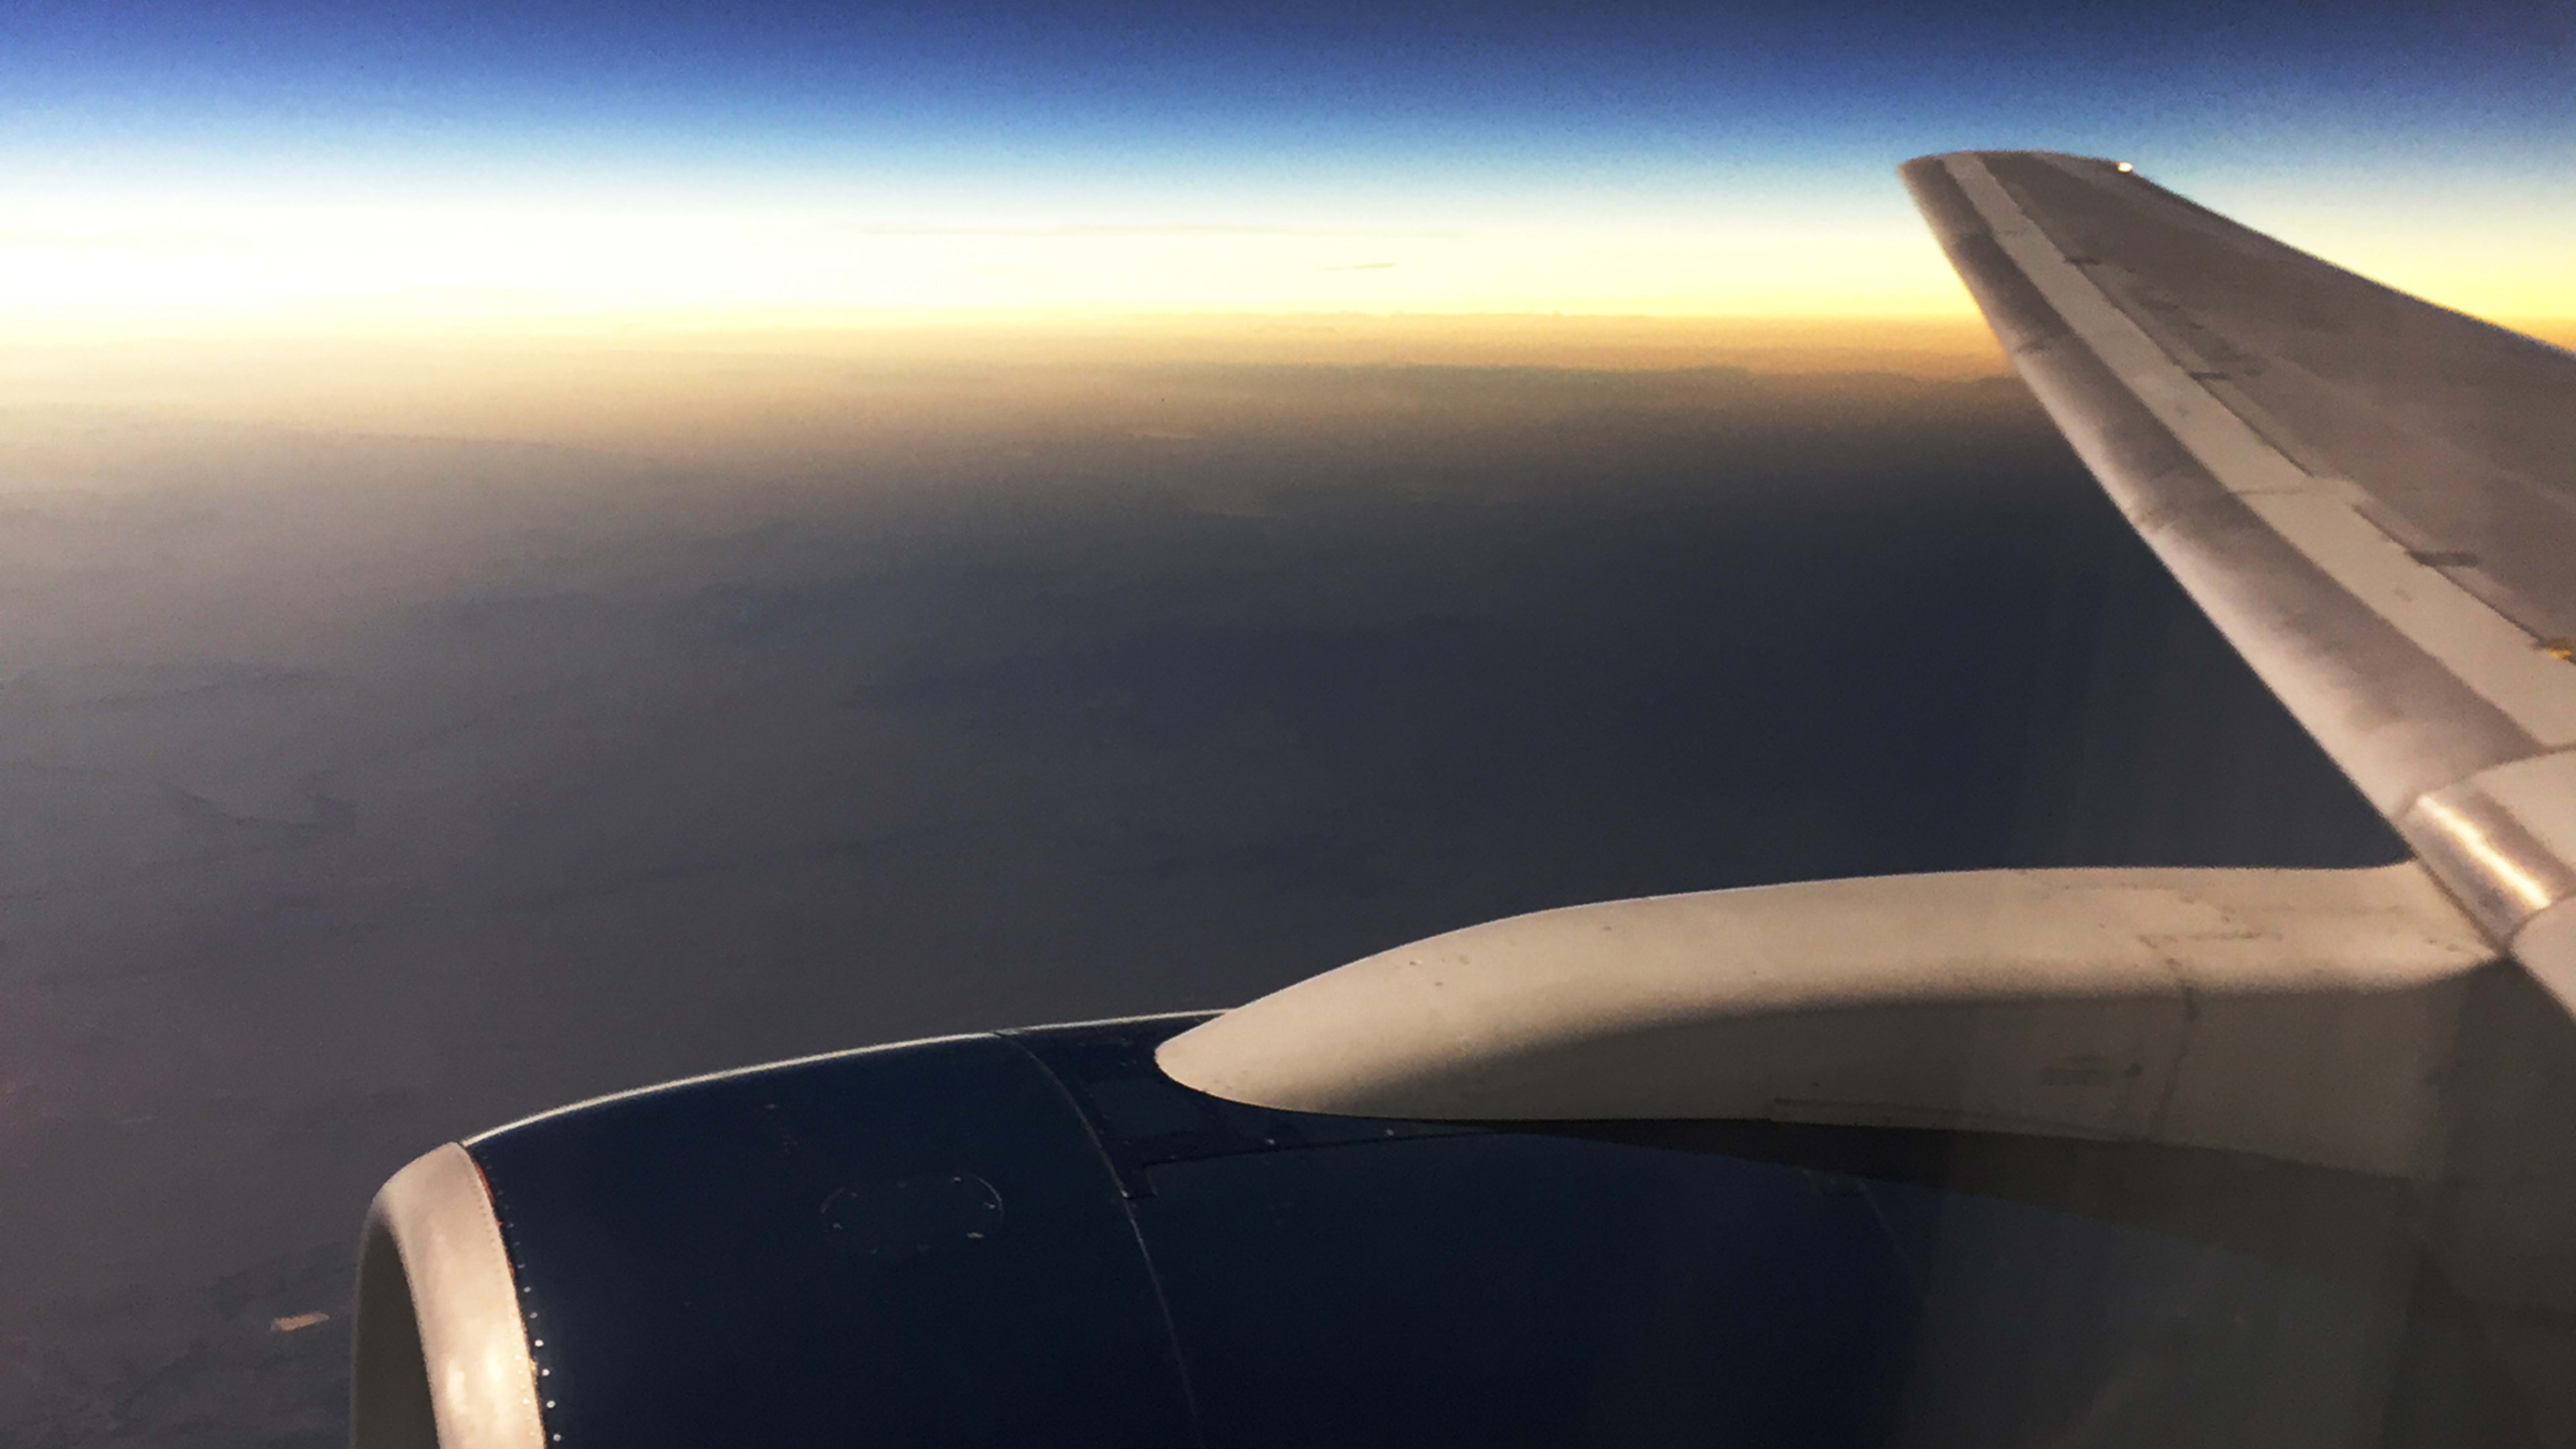 Here’s What The Solar Eclipse Looked Like From Delta’s Flight Of A Lifetime